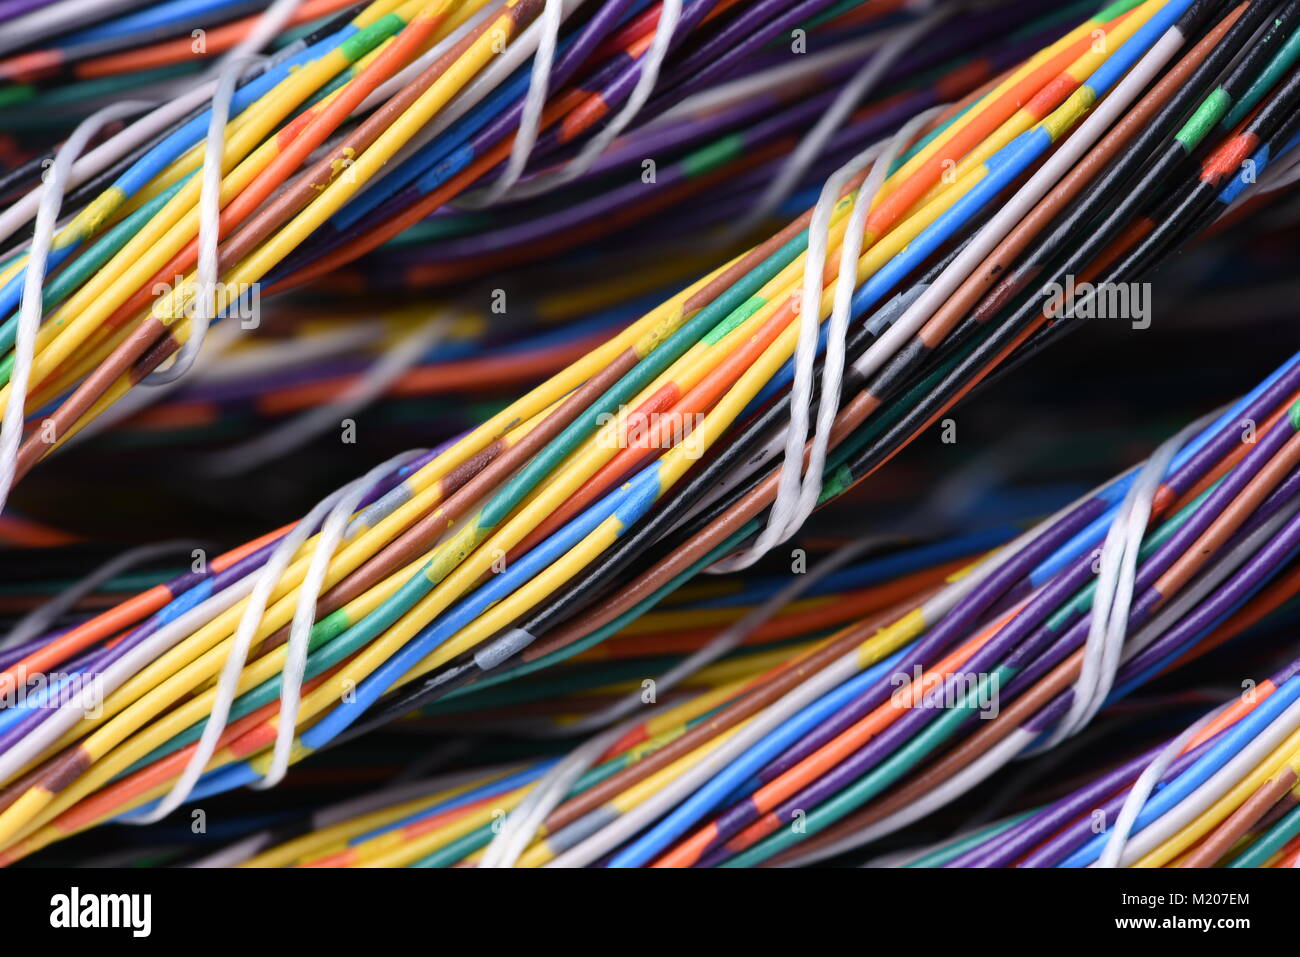 Bundle Electrical Colorful Cables and Wires Stock Photo - Alamy